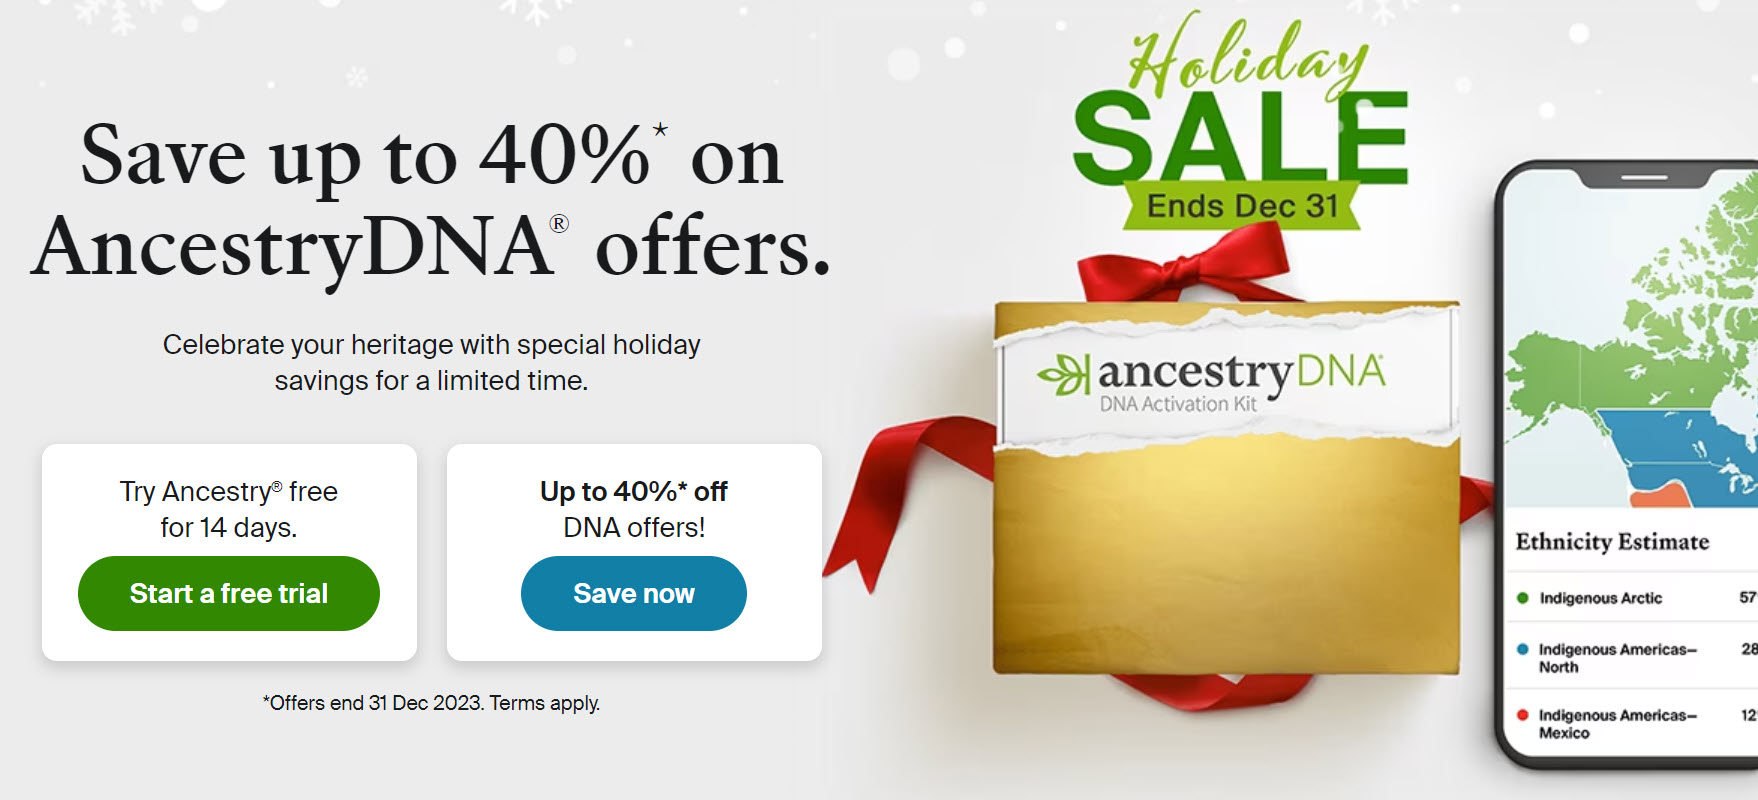 Ancestry DNA Holiday Offer 2023